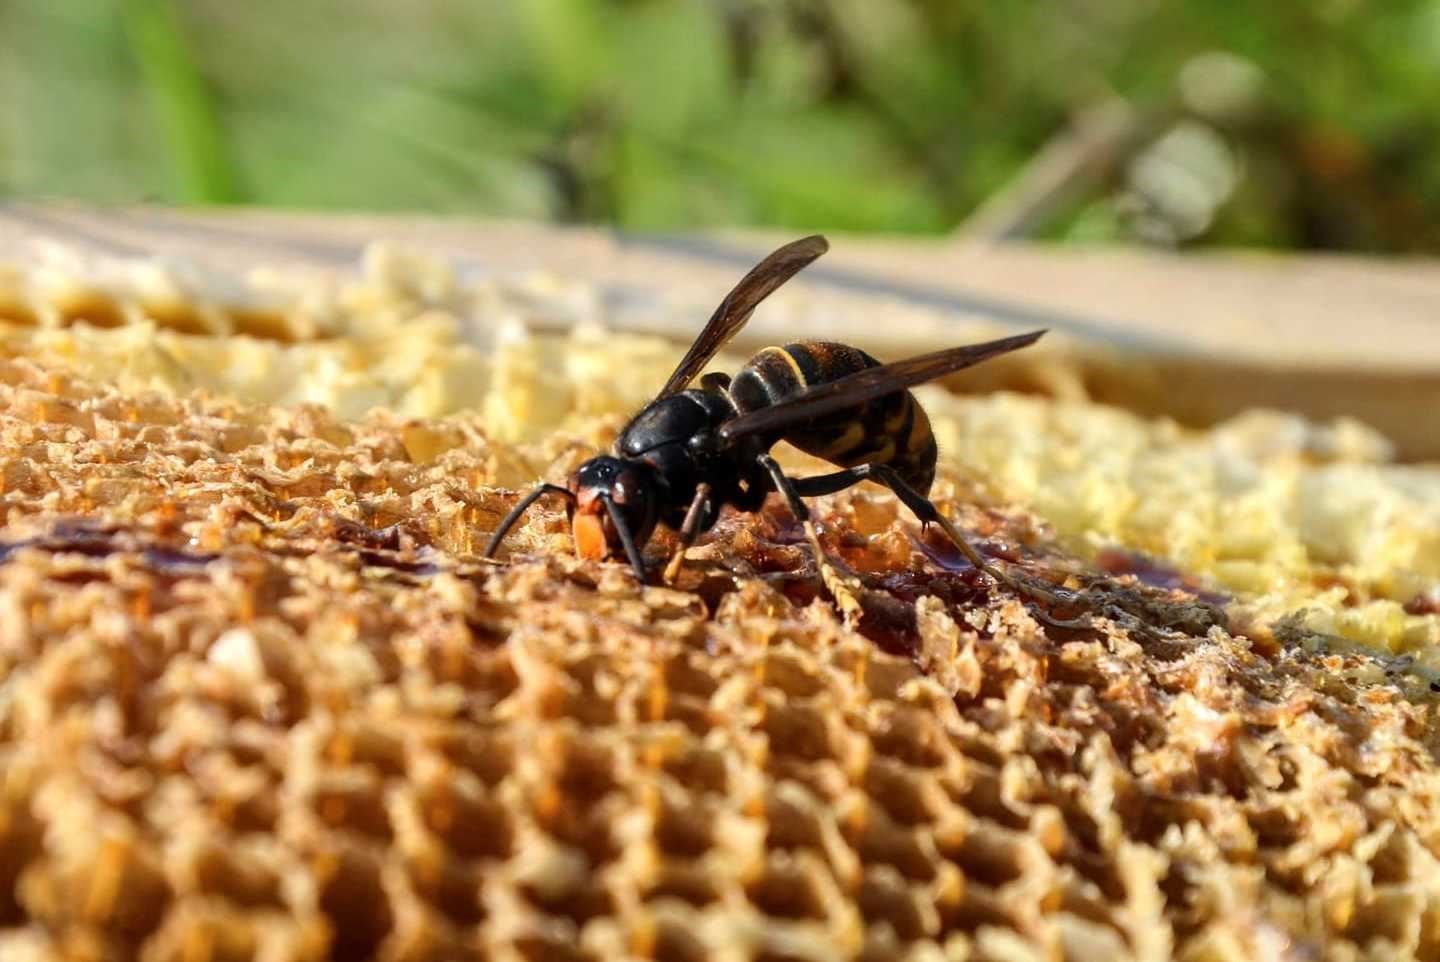 An Asian hornet spotted on a honeycomb in England - concerns have been raised about their spread into Scotland.